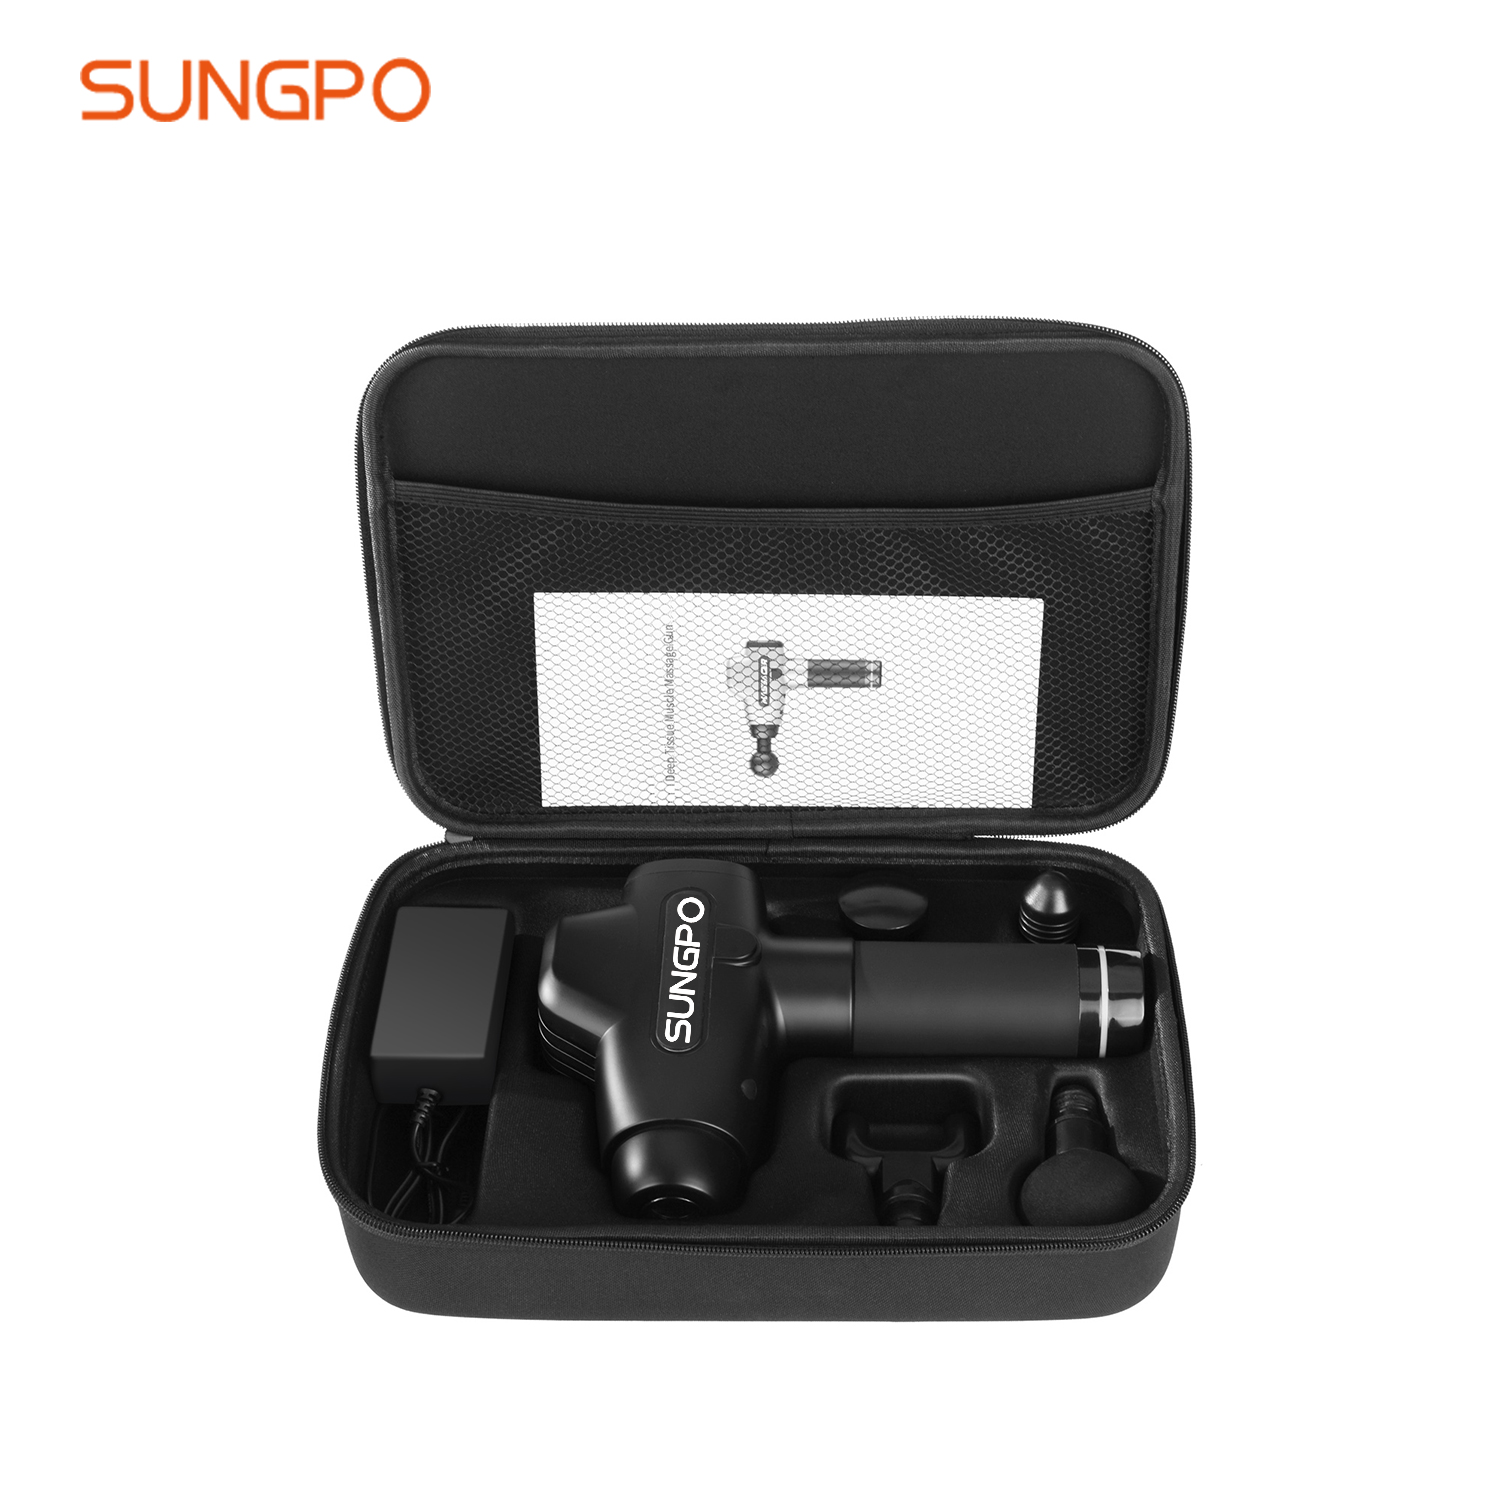 SUNGPO popular power massagers supplier for relax-1